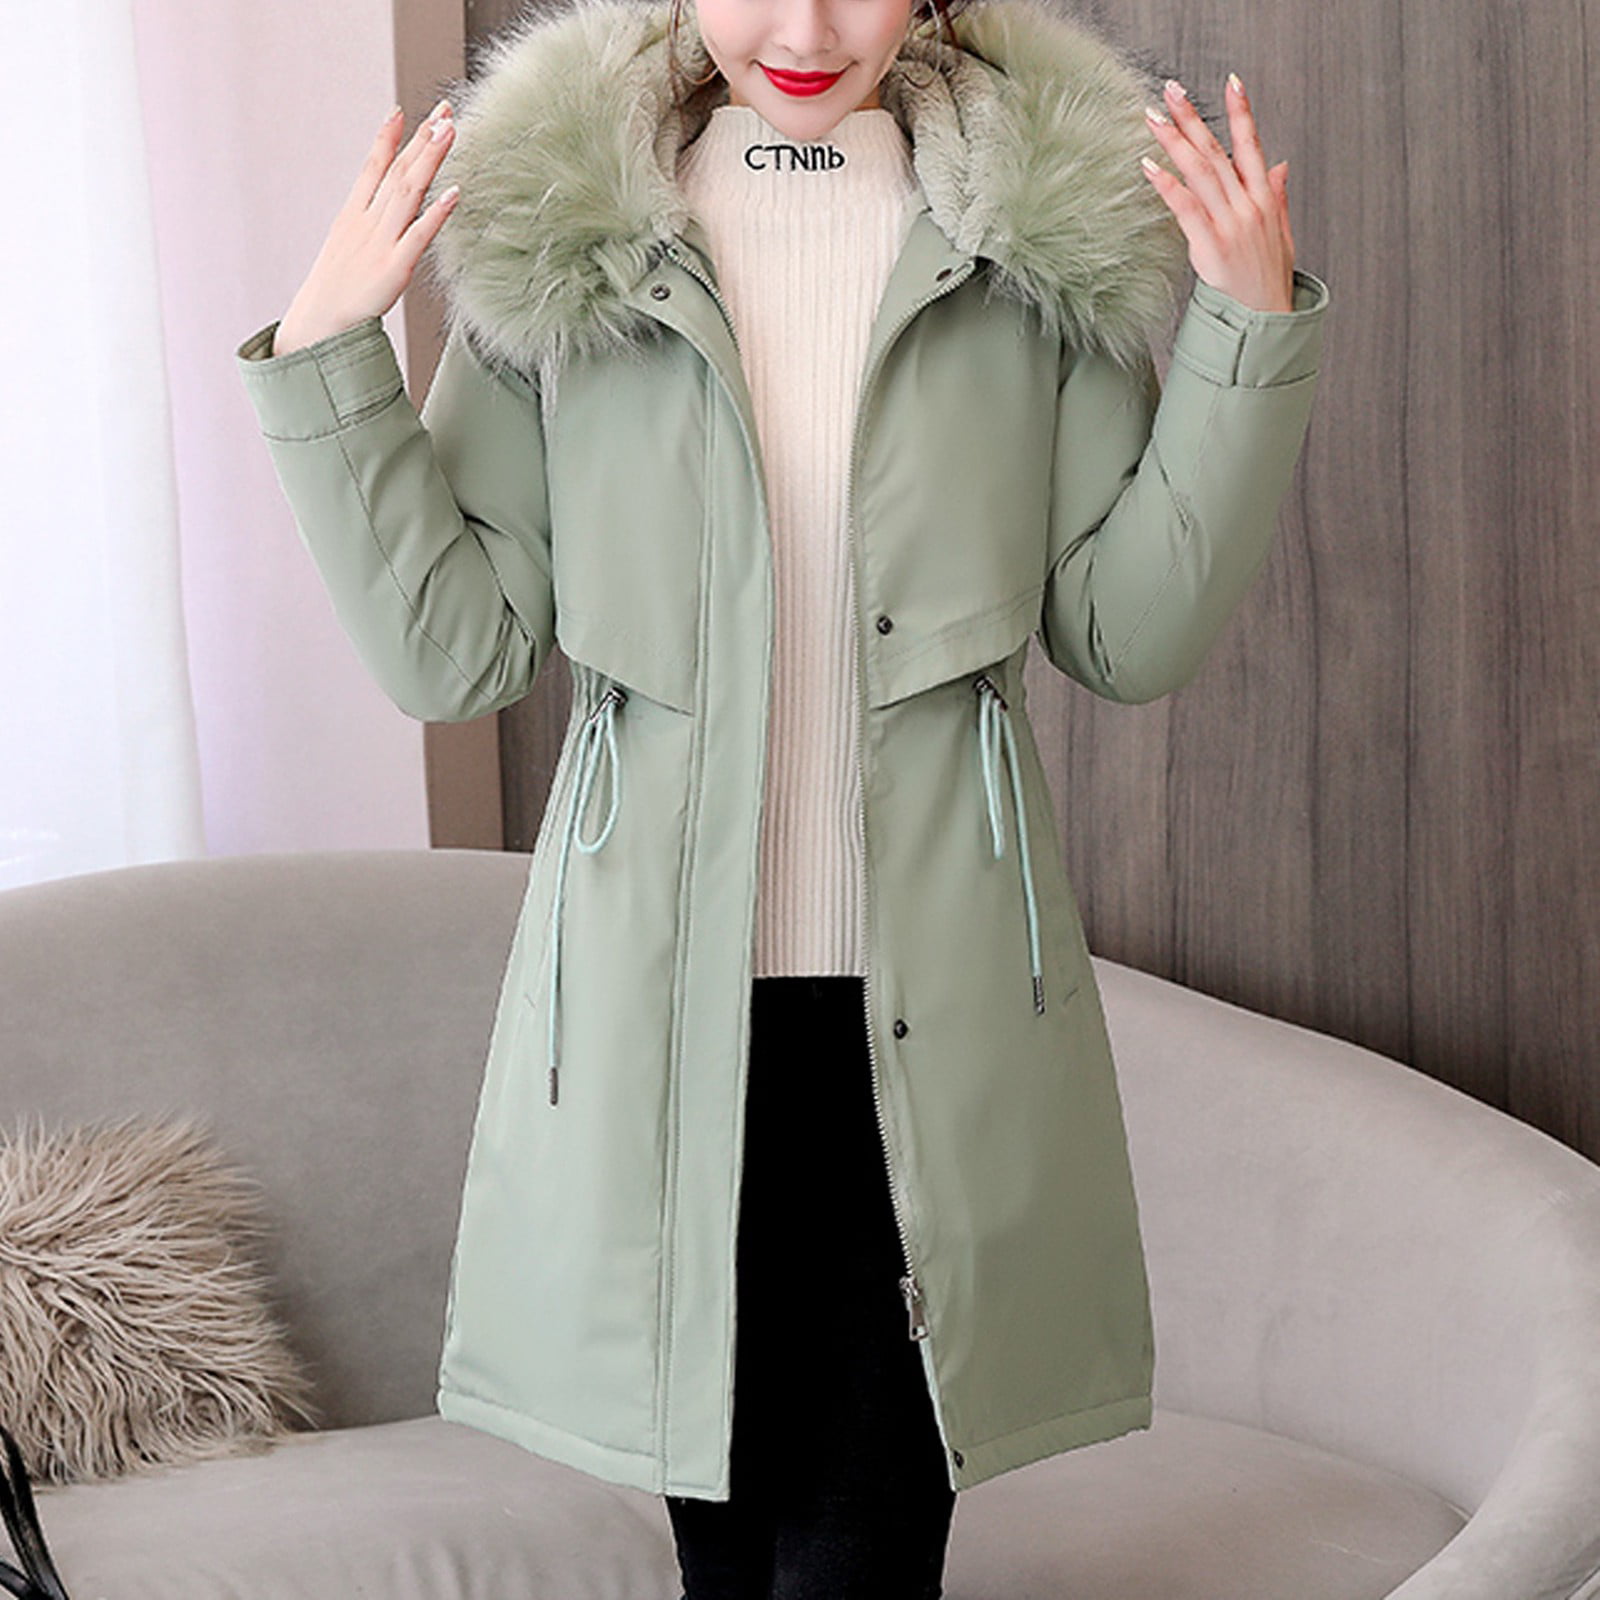 LAWOR Plus Size Coats Winter Clearance Women Trendy Outerwear Long Cotton-Padded  Jackets Pocket Suede Hooded Coats Fall Savings Z 